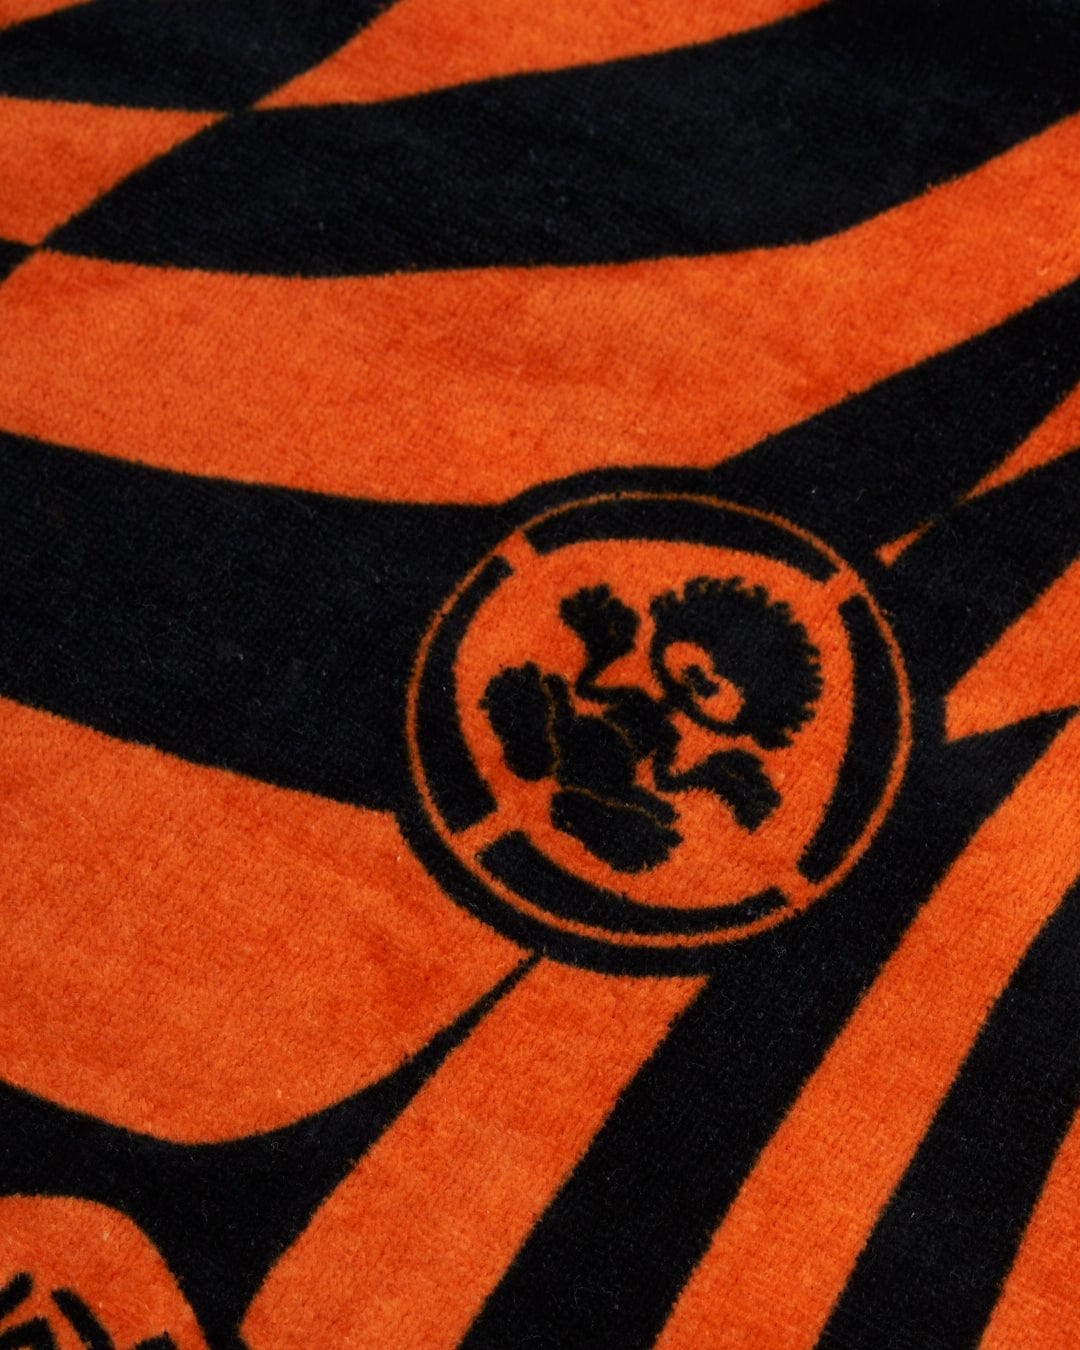 Close-up of a vibrant blue and orange striped 100% cotton fabric featuring a circular emblem with a stylized lion design, like the Warp Icon - Kids Changing Towel from Saltrock.